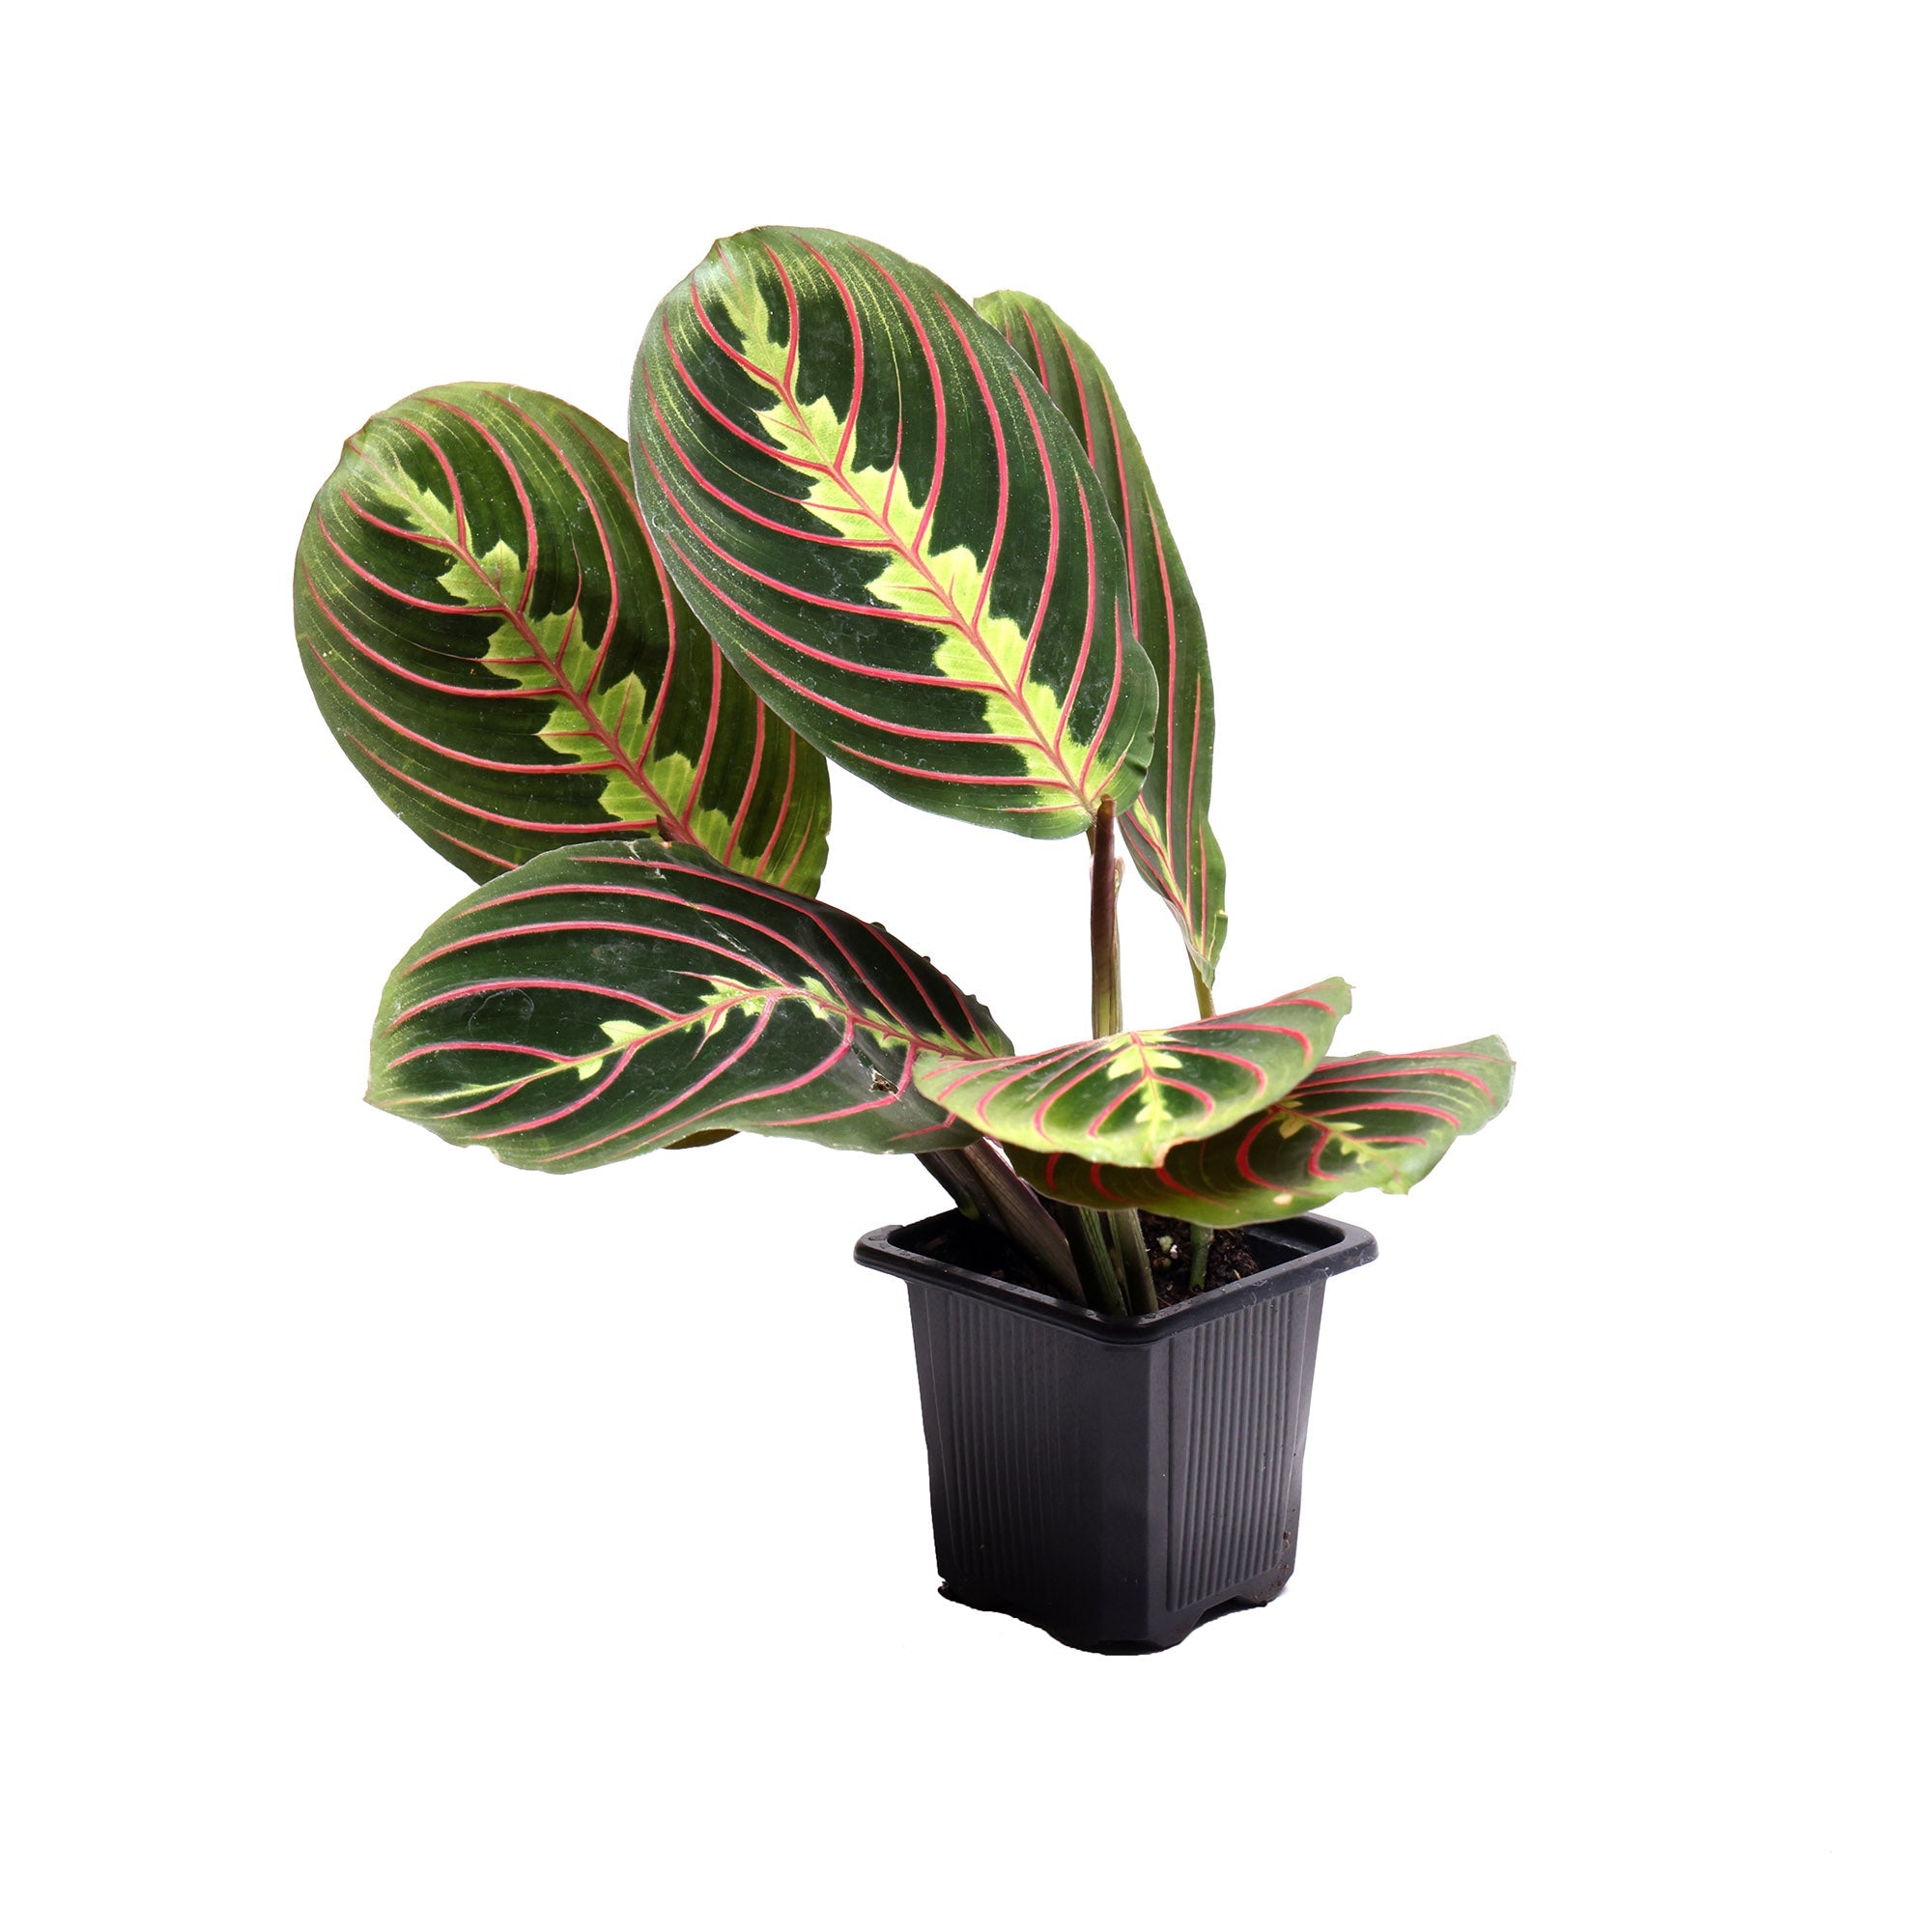 A Chive Studio 2024 Prayer Plant Red 3.5 Inch Pot with large, oval, dark green leaves featuring distinct red veins and light green patterns. The houseplant is in a small, black, square pot against a white background.